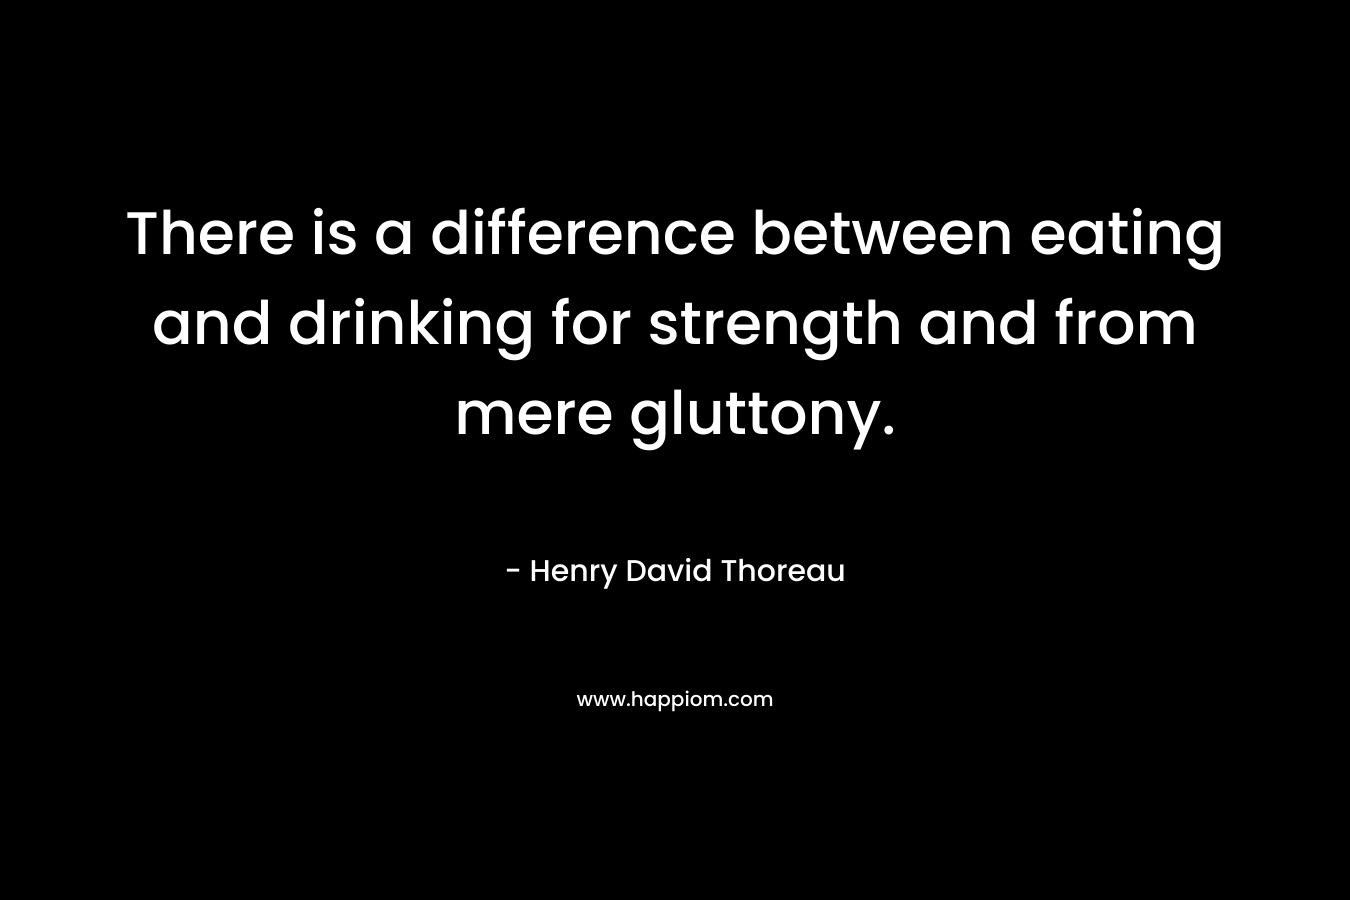 There is a difference between eating and drinking for strength and from mere gluttony.